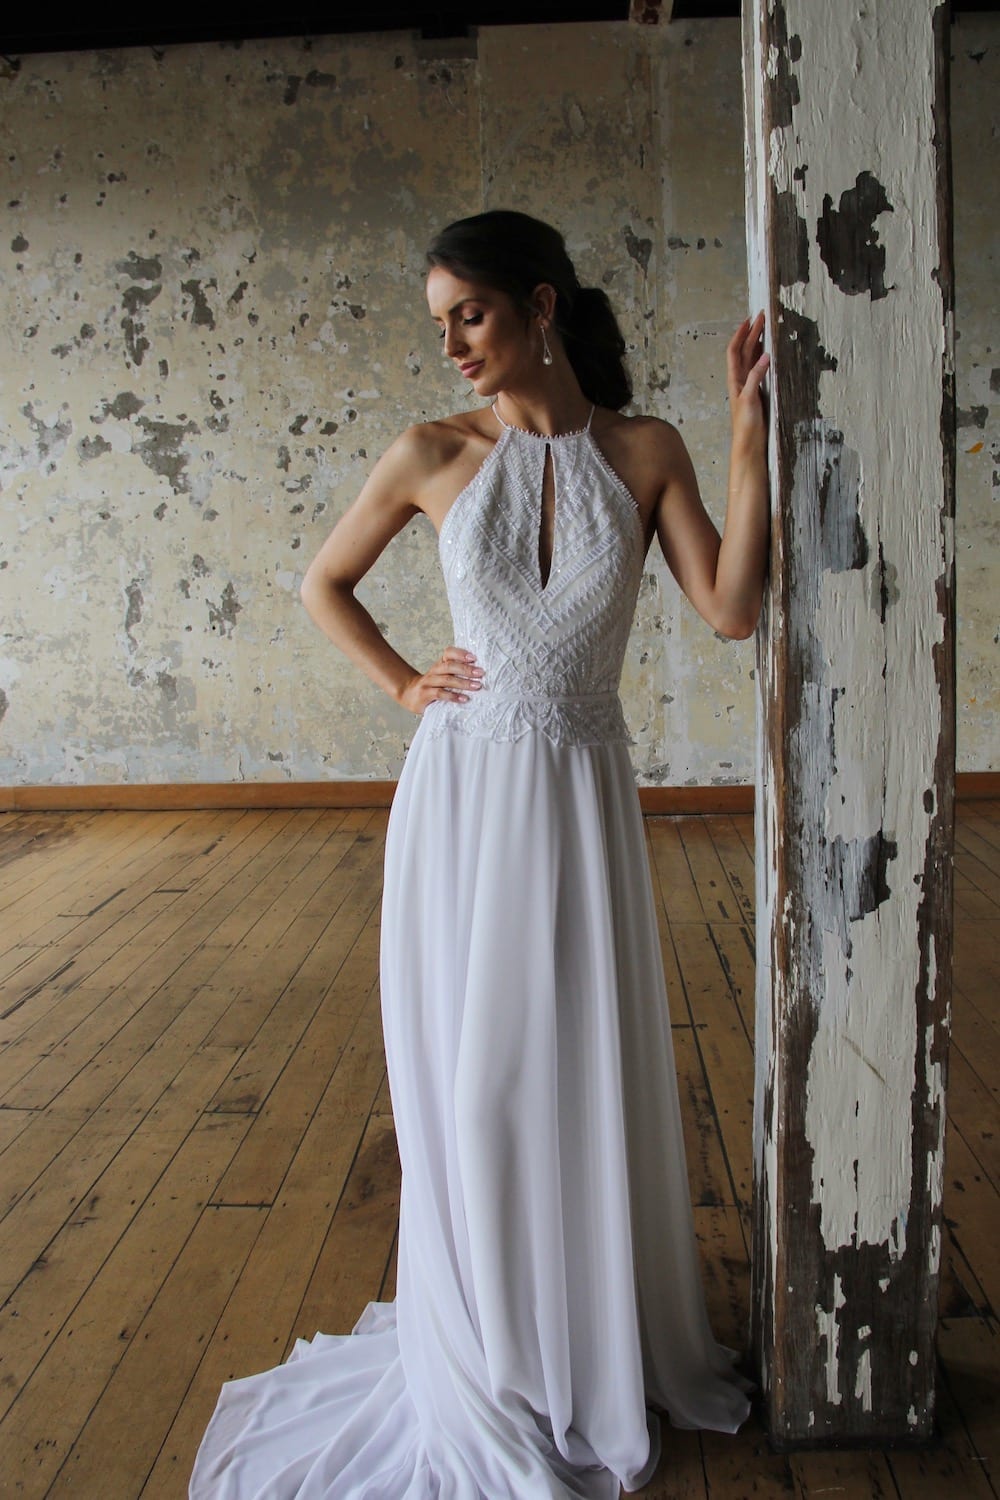 Female model wearing Vinka Design Modern Muse Wedding Dress. In chic warehouse the front detail of a light, halter-necked gown with a fluid chiffon skirt.